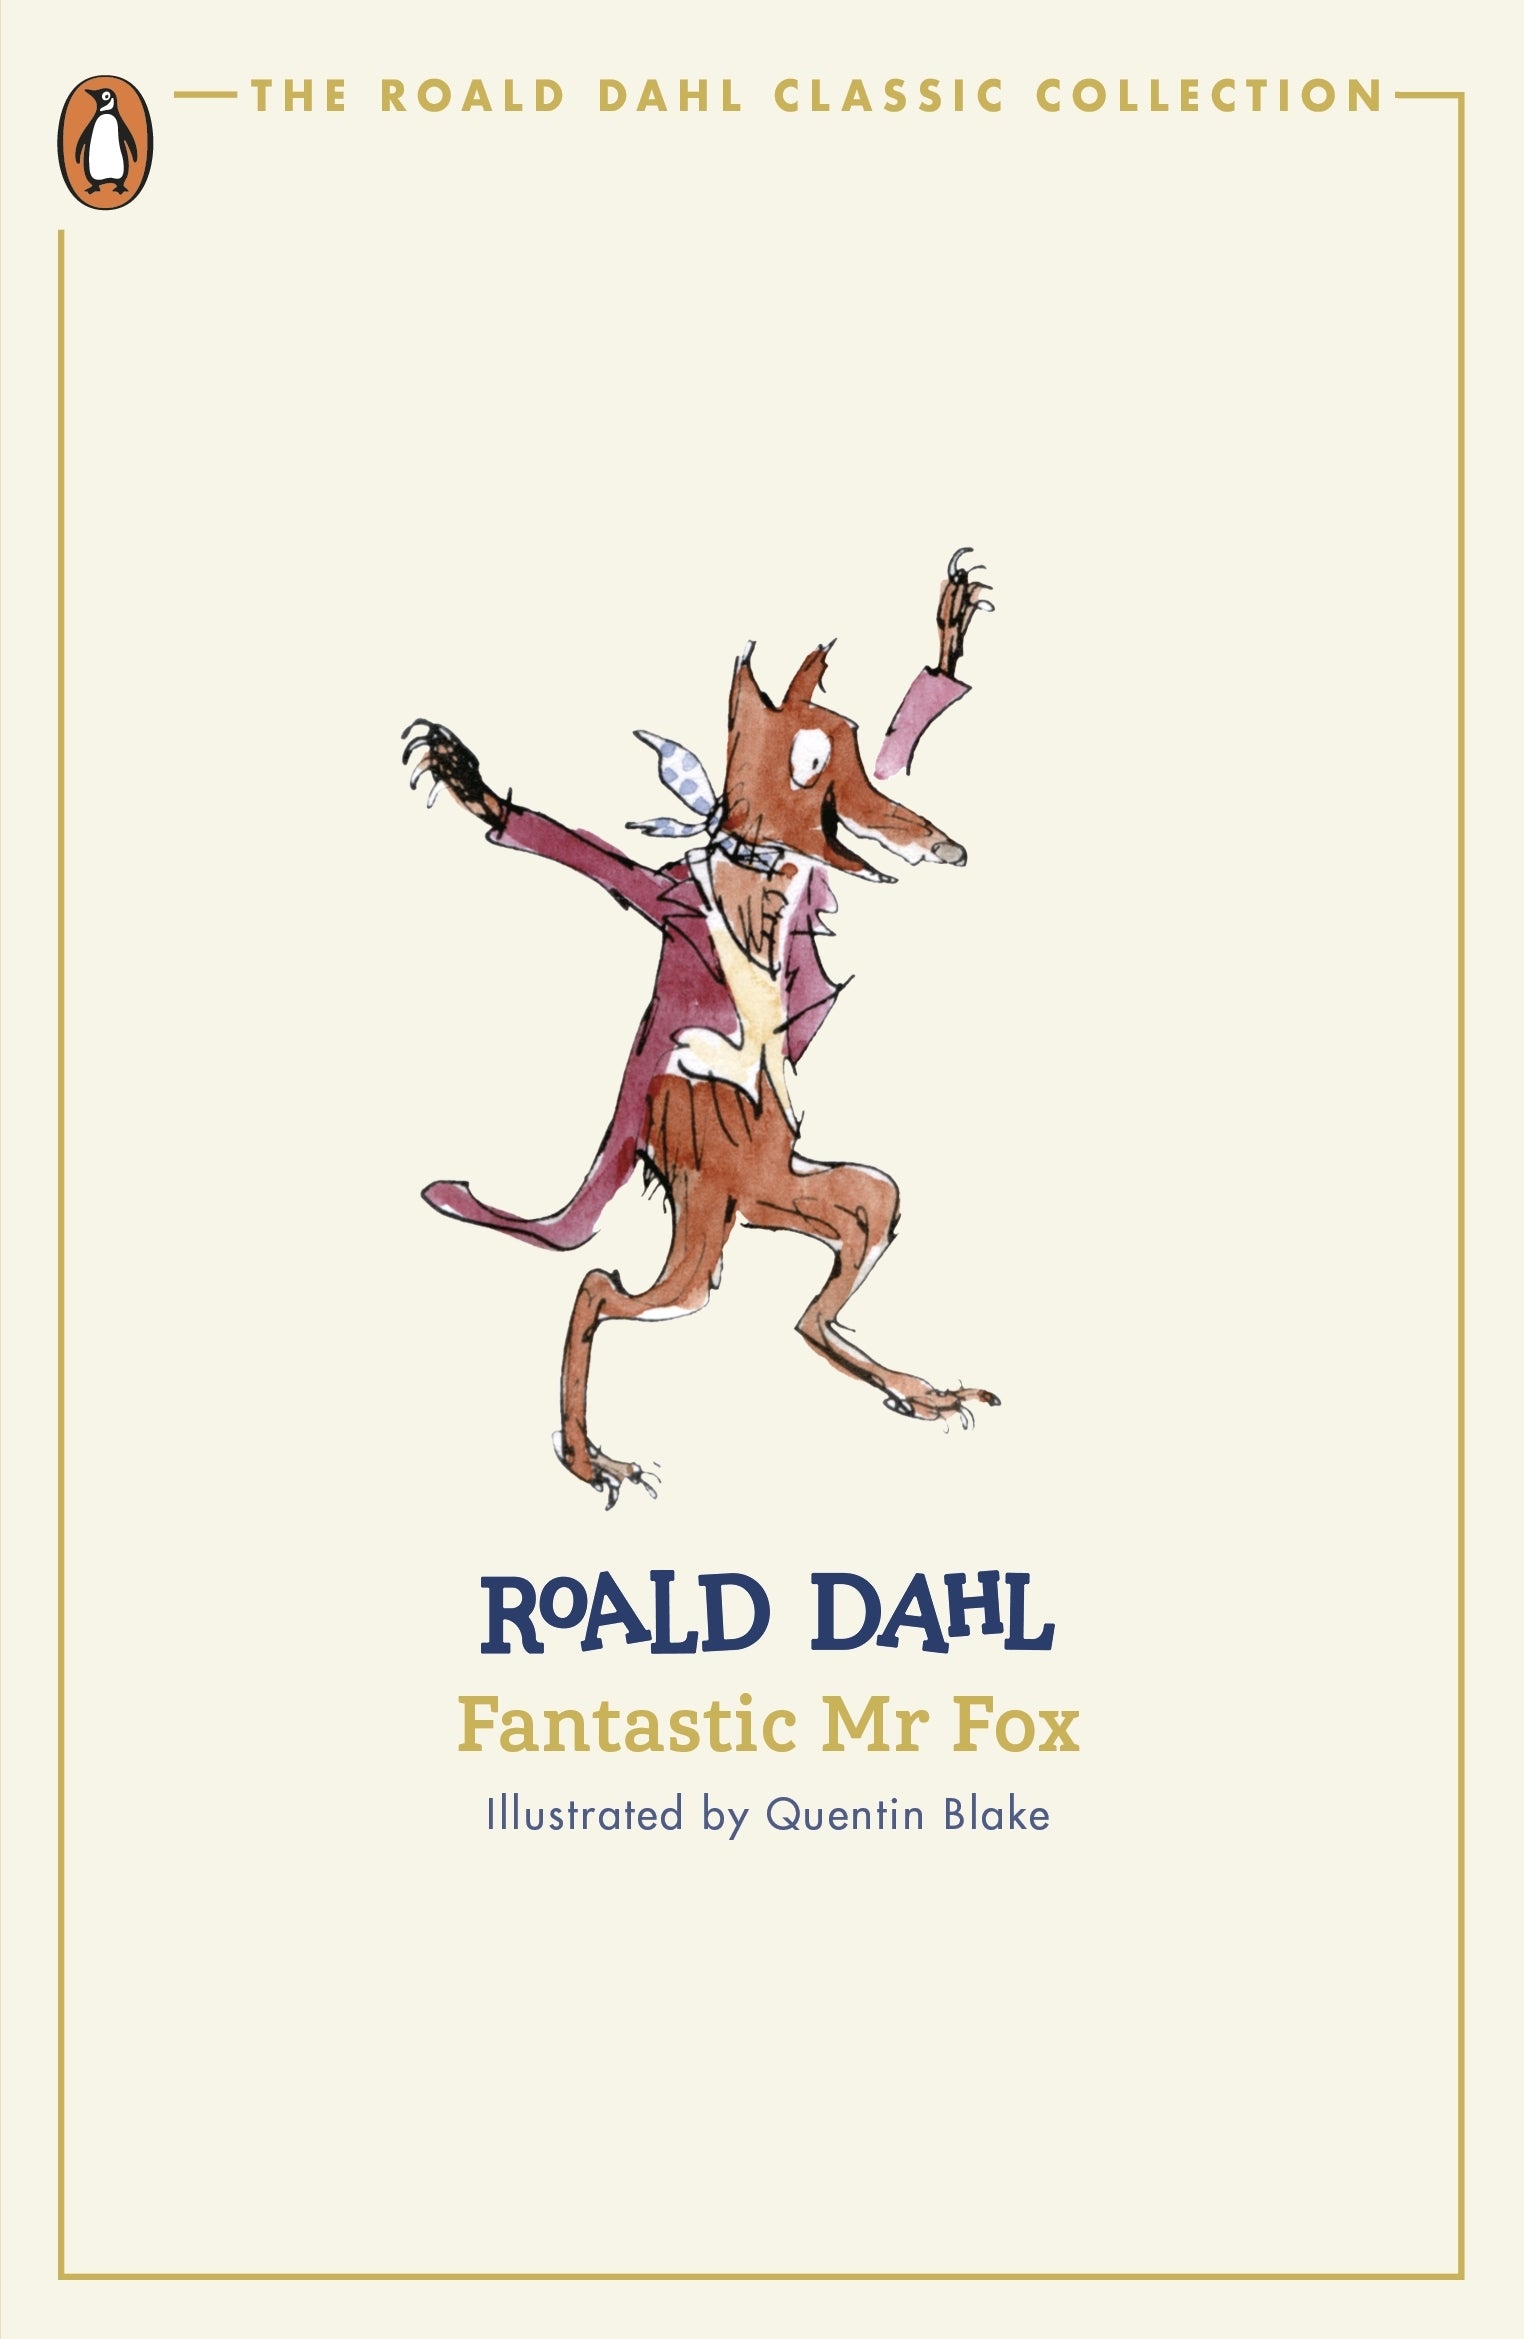 Fantastic Mr Fox by Roald Dahl (Classic Collection)